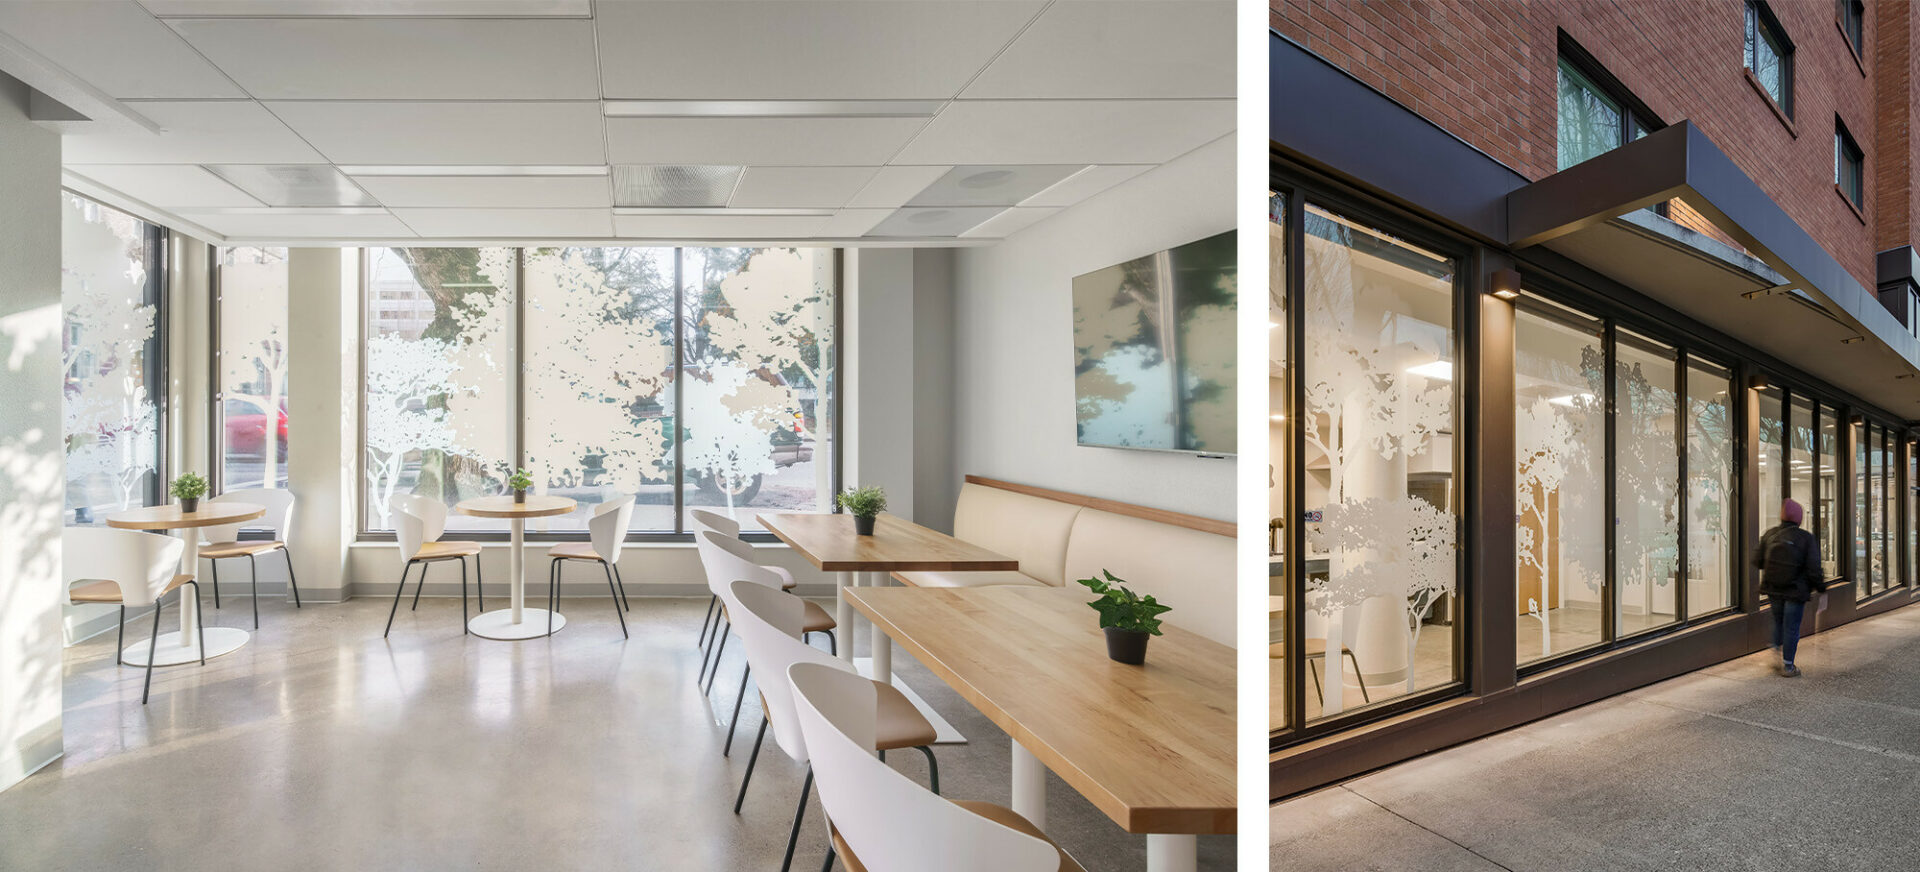 Two photos side by side. The left shows a light filled community room. Graphic decals of leafy trees add interesting shade patterns in the room. The right photo shows the same graphics from the exterior of the building.